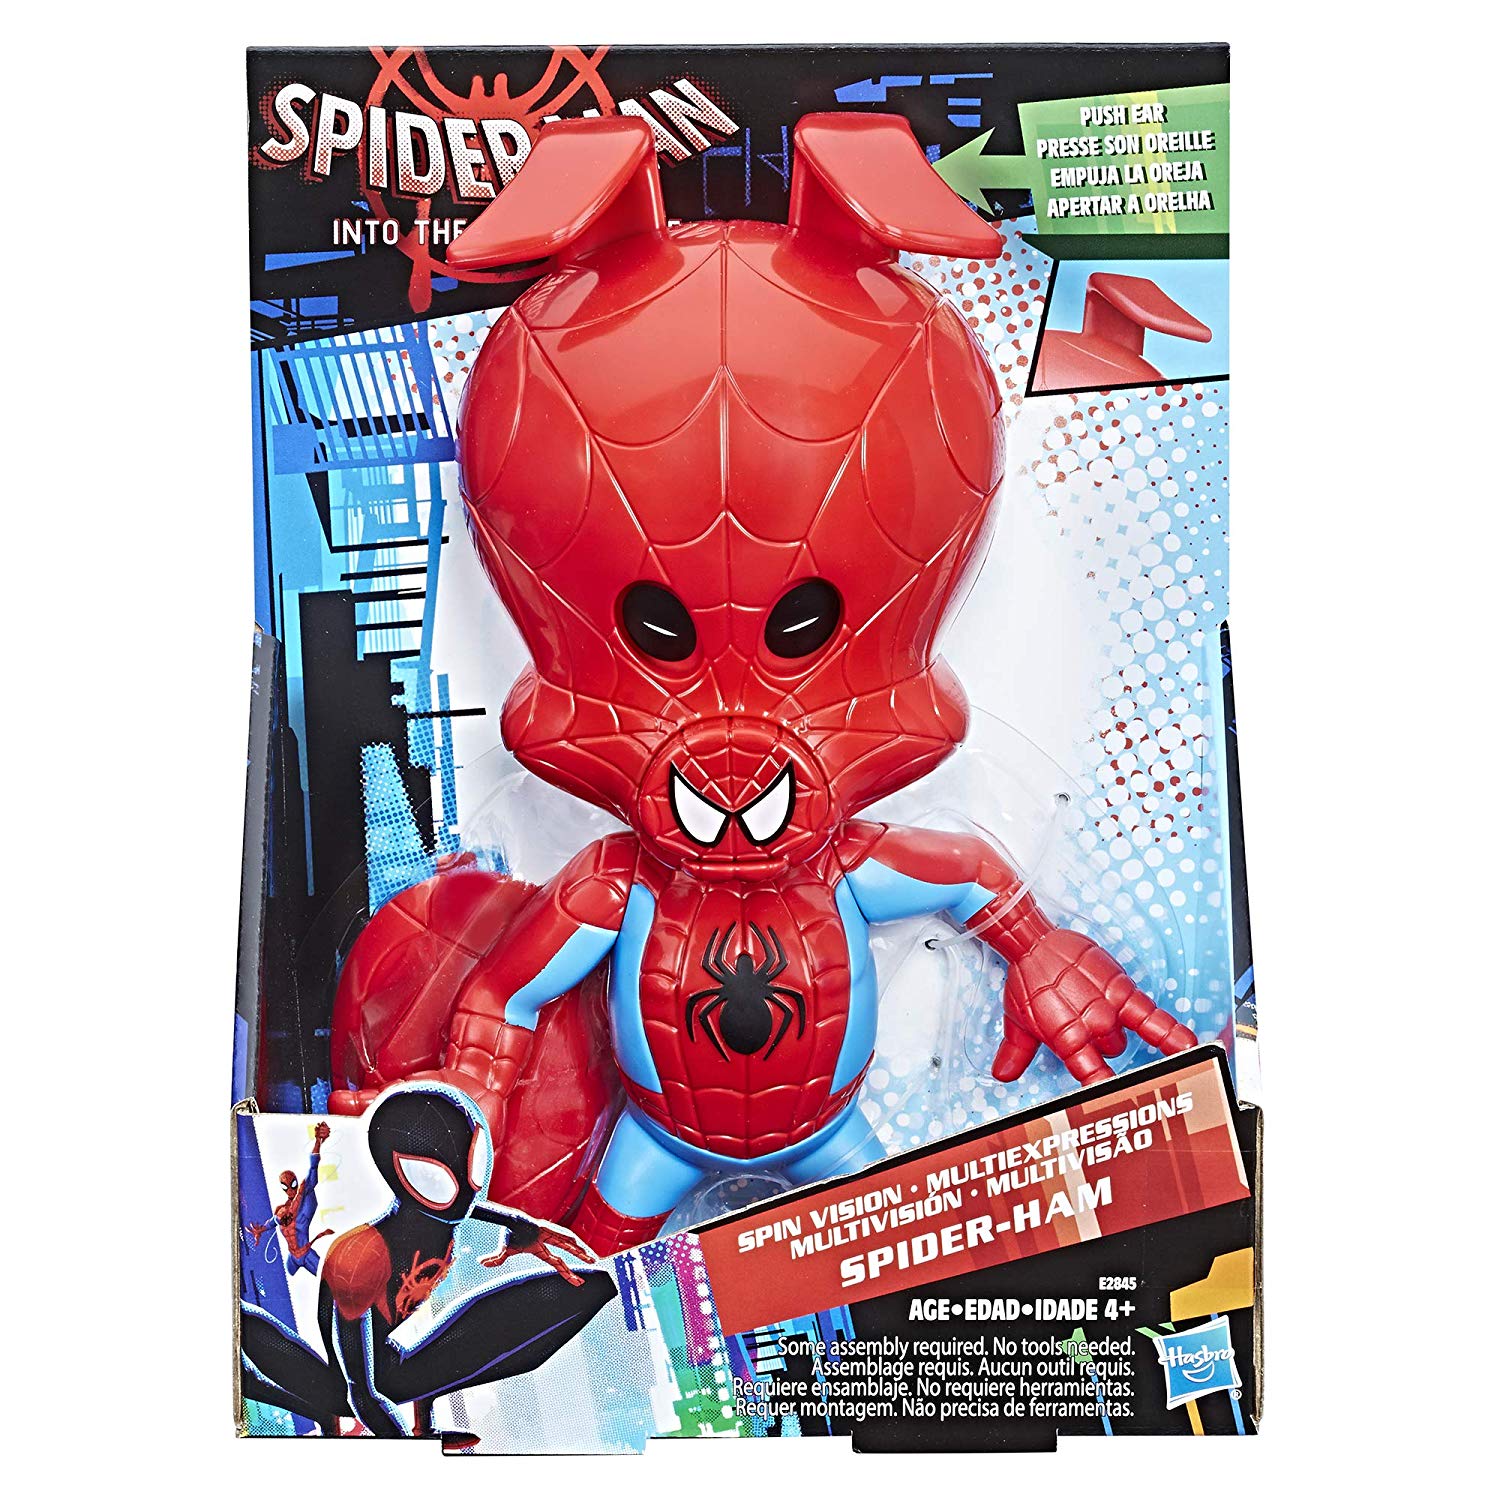 large spiderman toy